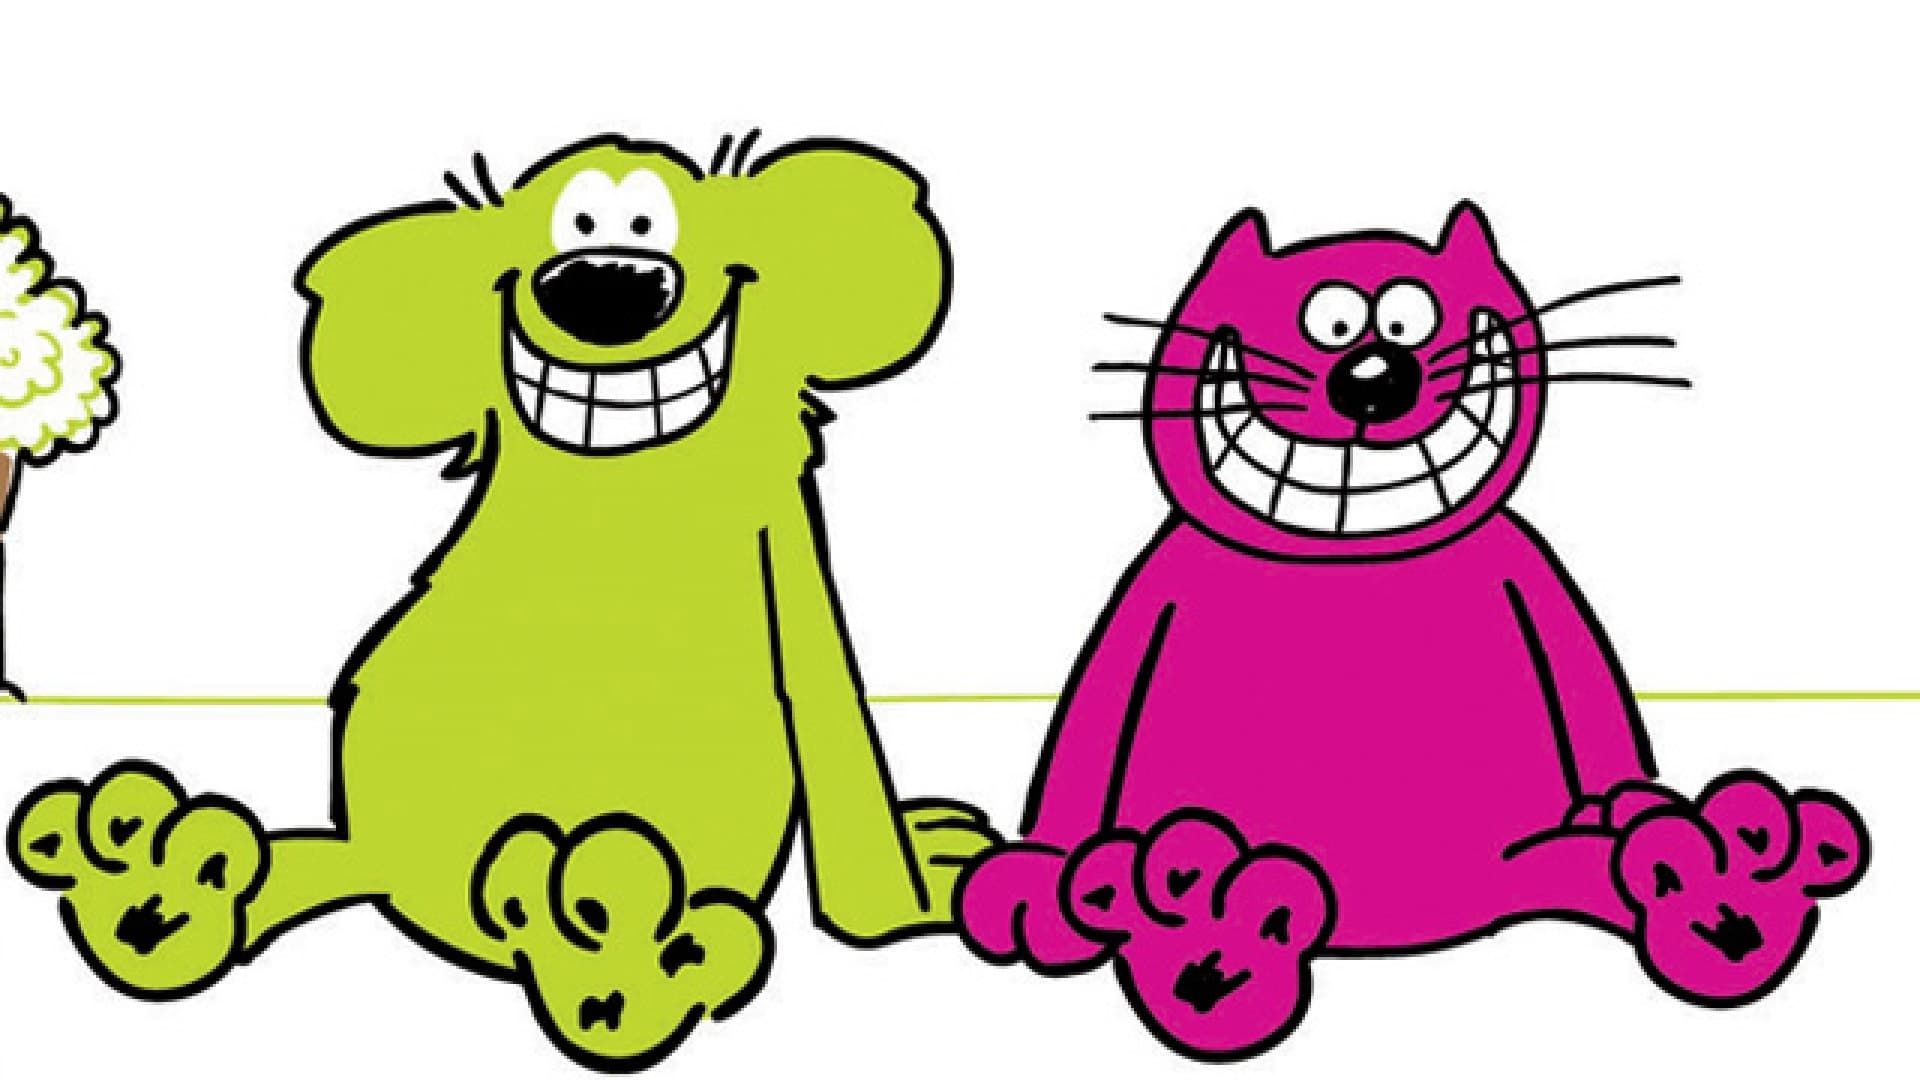 Roobarb background